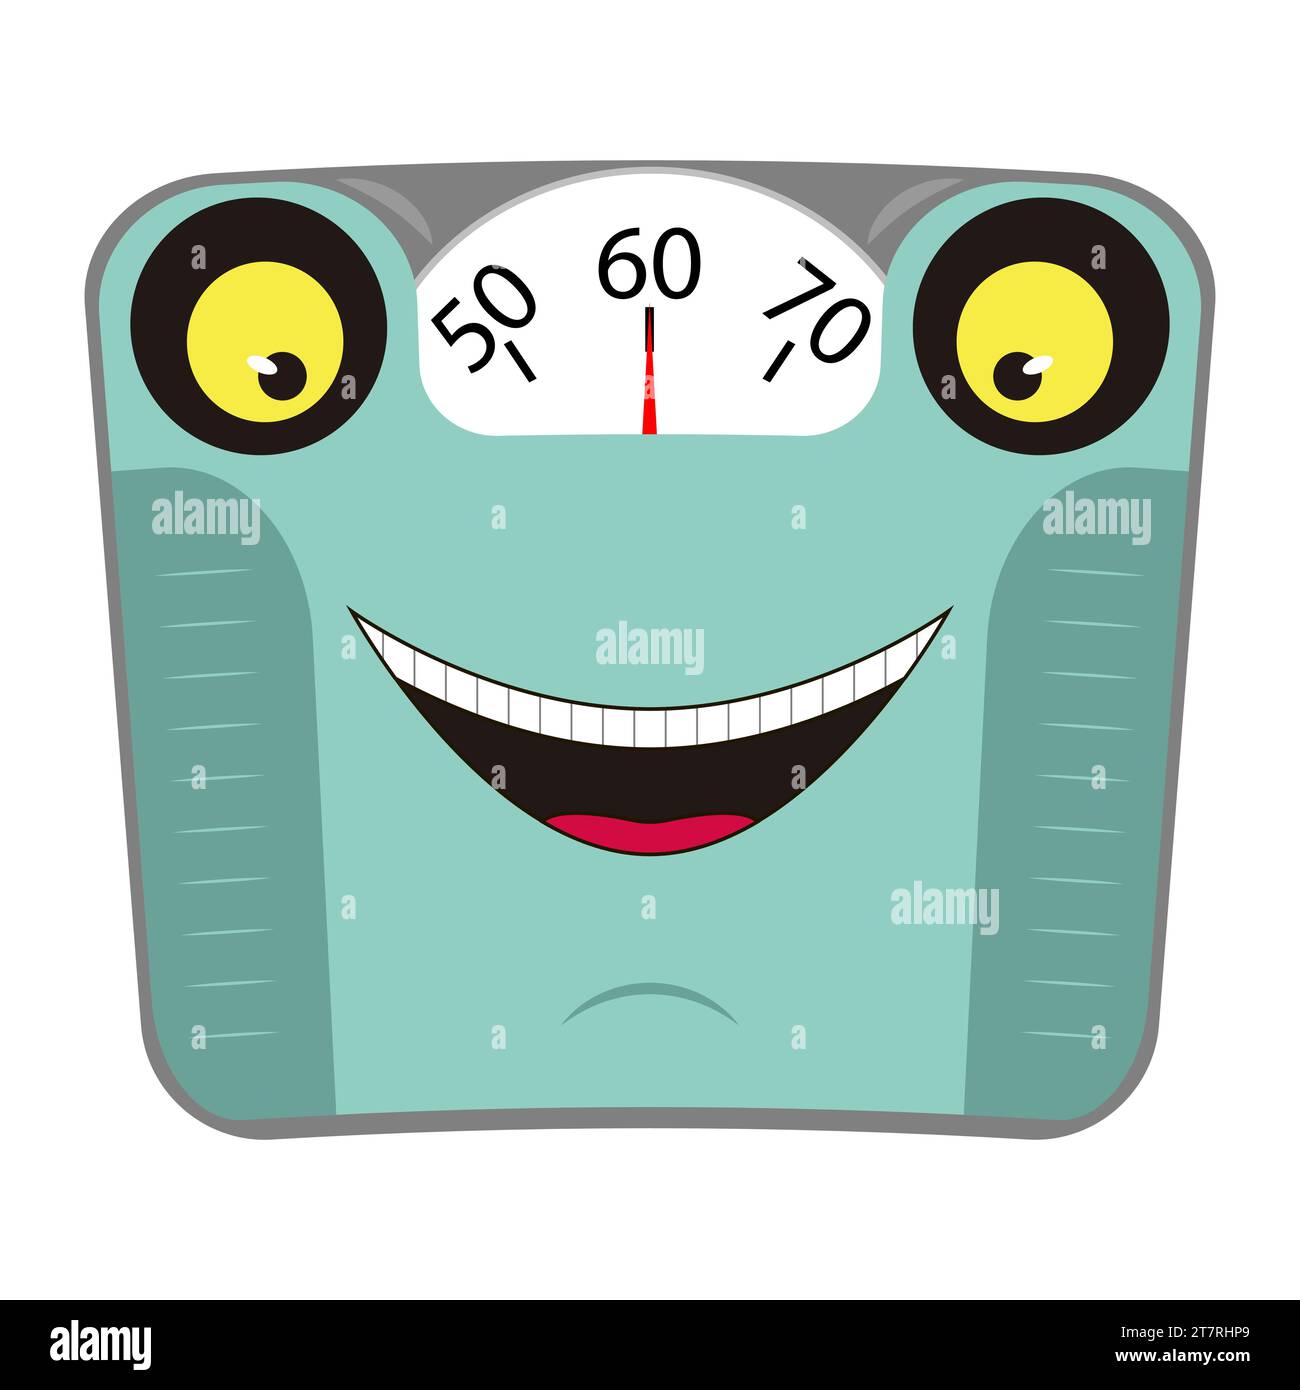 https://c8.alamy.com/comp/2T7RHP9/funny-mechanical-body-weight-scale-with-face-and-smile-concept-healthy-lifestyle-cartoon-character-vector-illustration-2T7RHP9.jpg